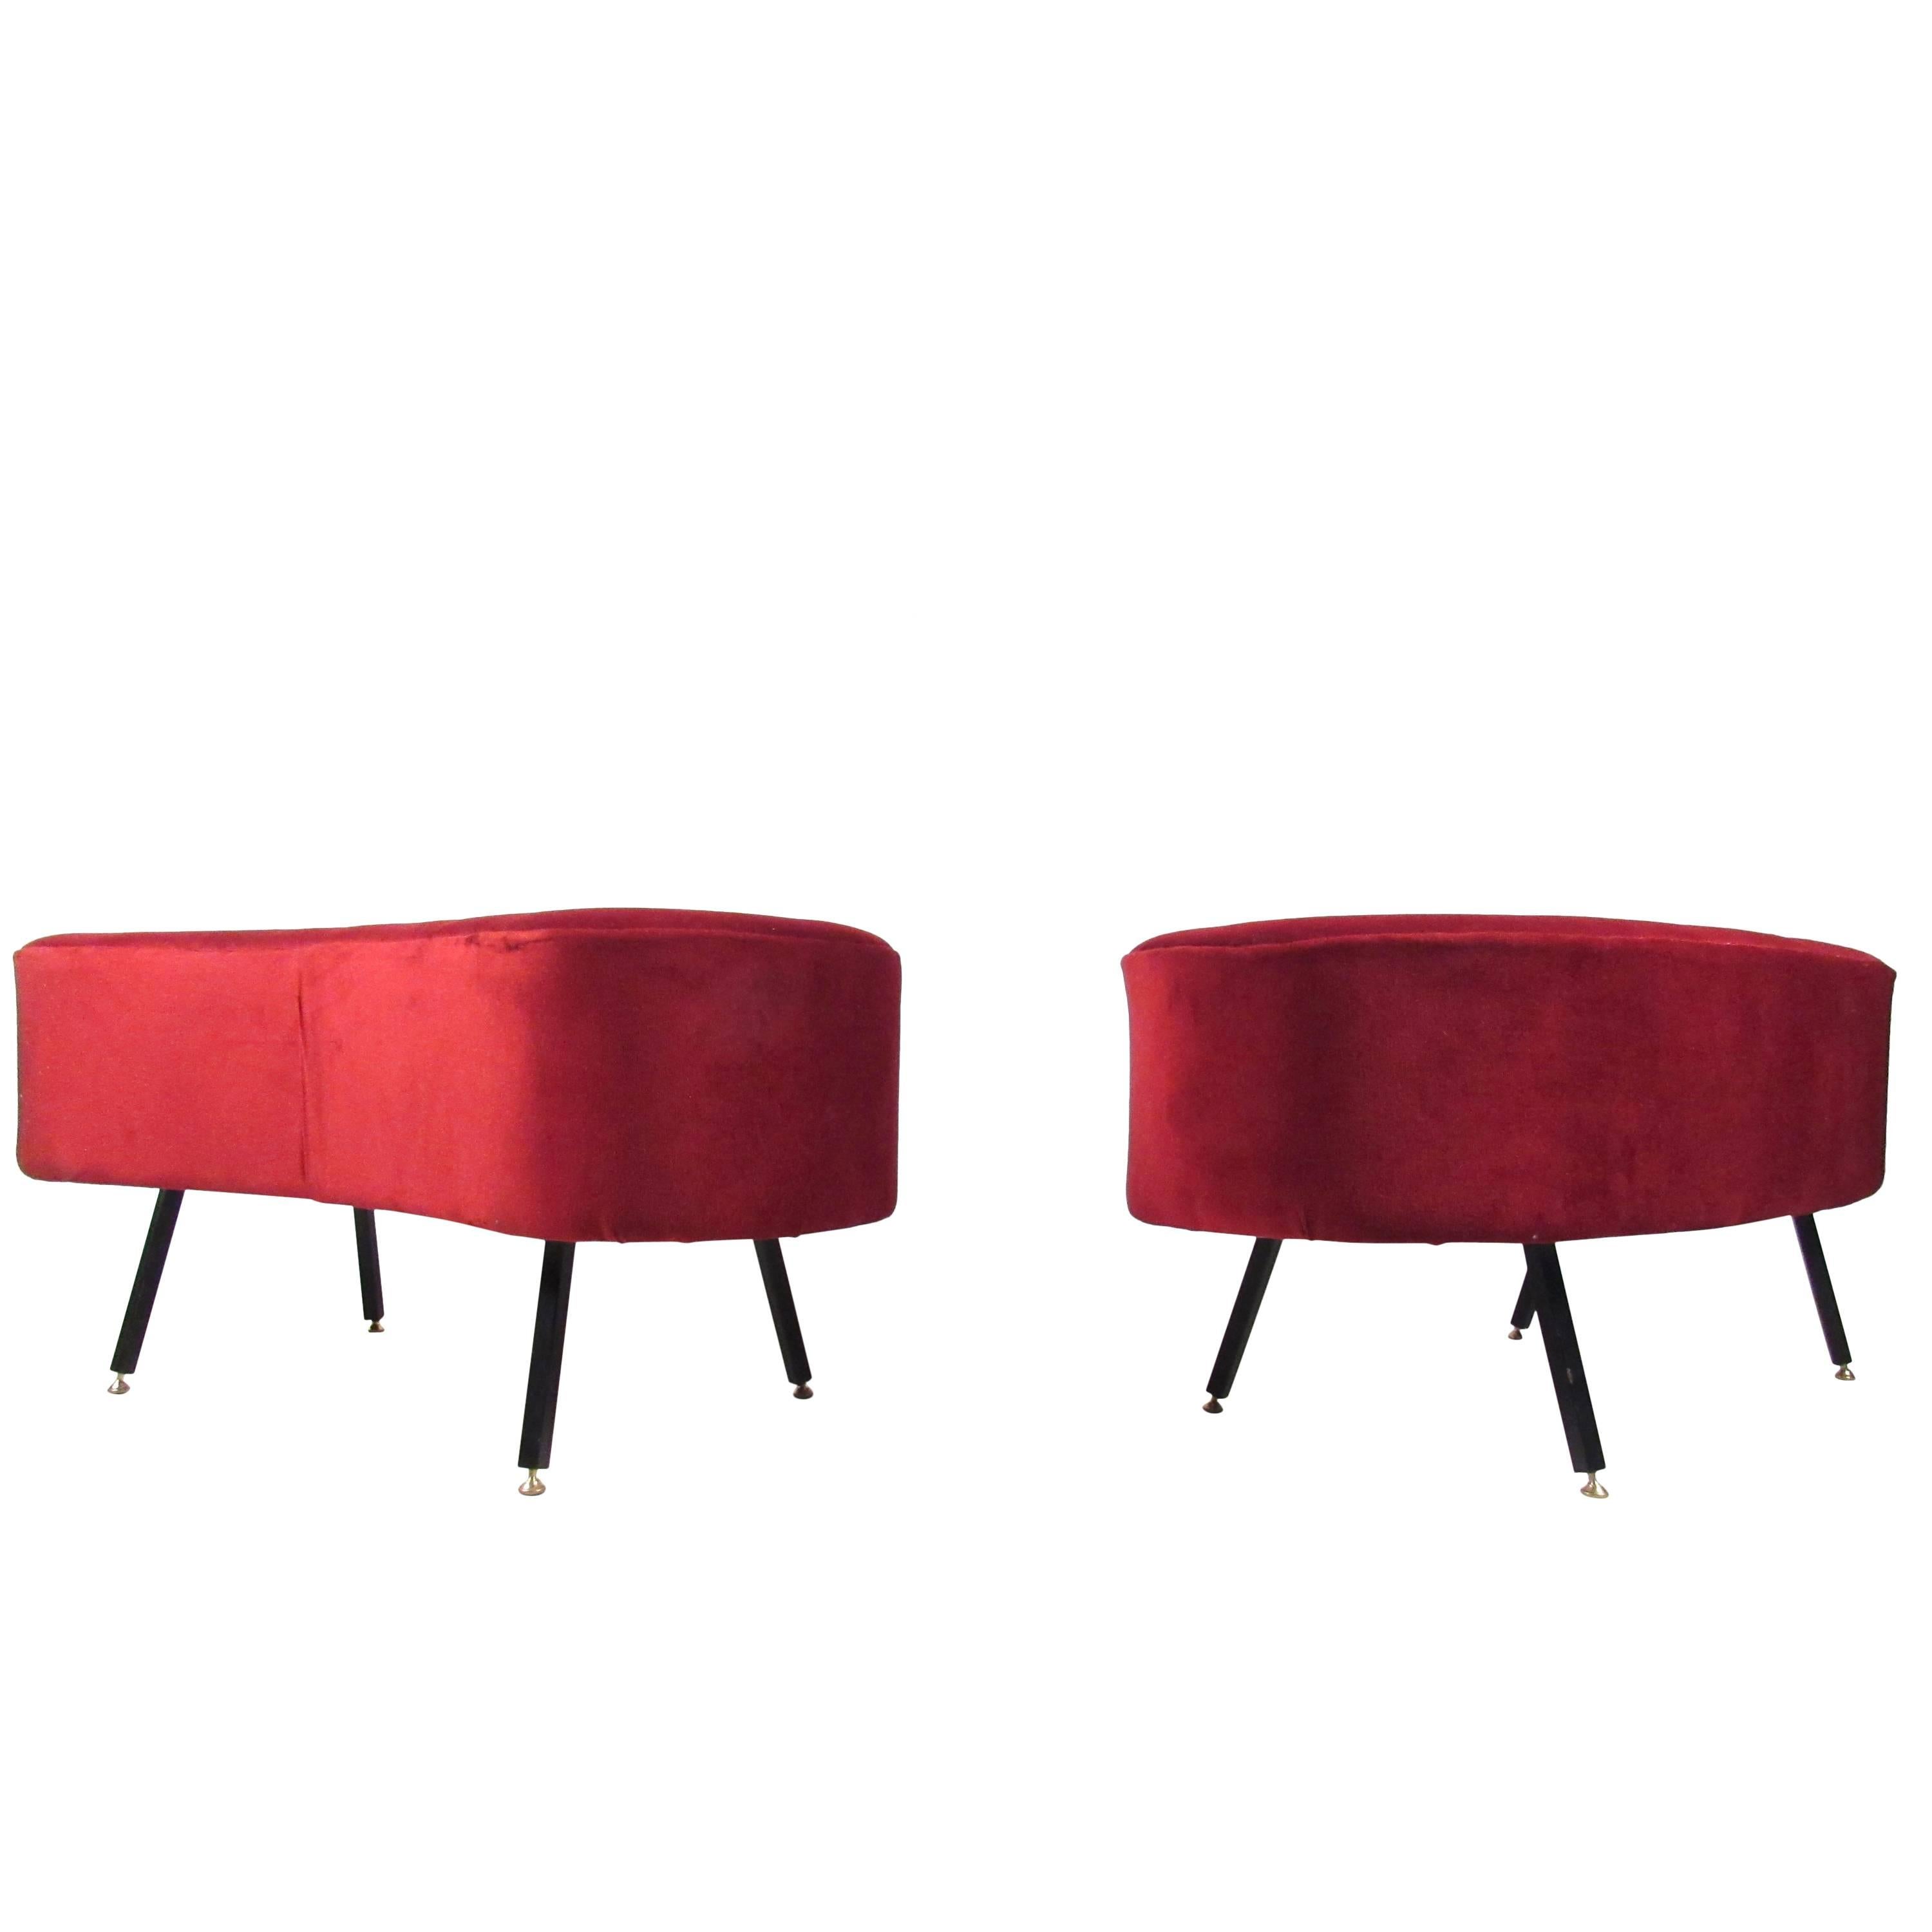 ( 1 ) Available.

This unique Italian style ottoman features a uniquely Mid-Century feel with it's elegant red upholstery and metal legs. Listing is for one stool, although two are available. Please contact for details and to confirm item location